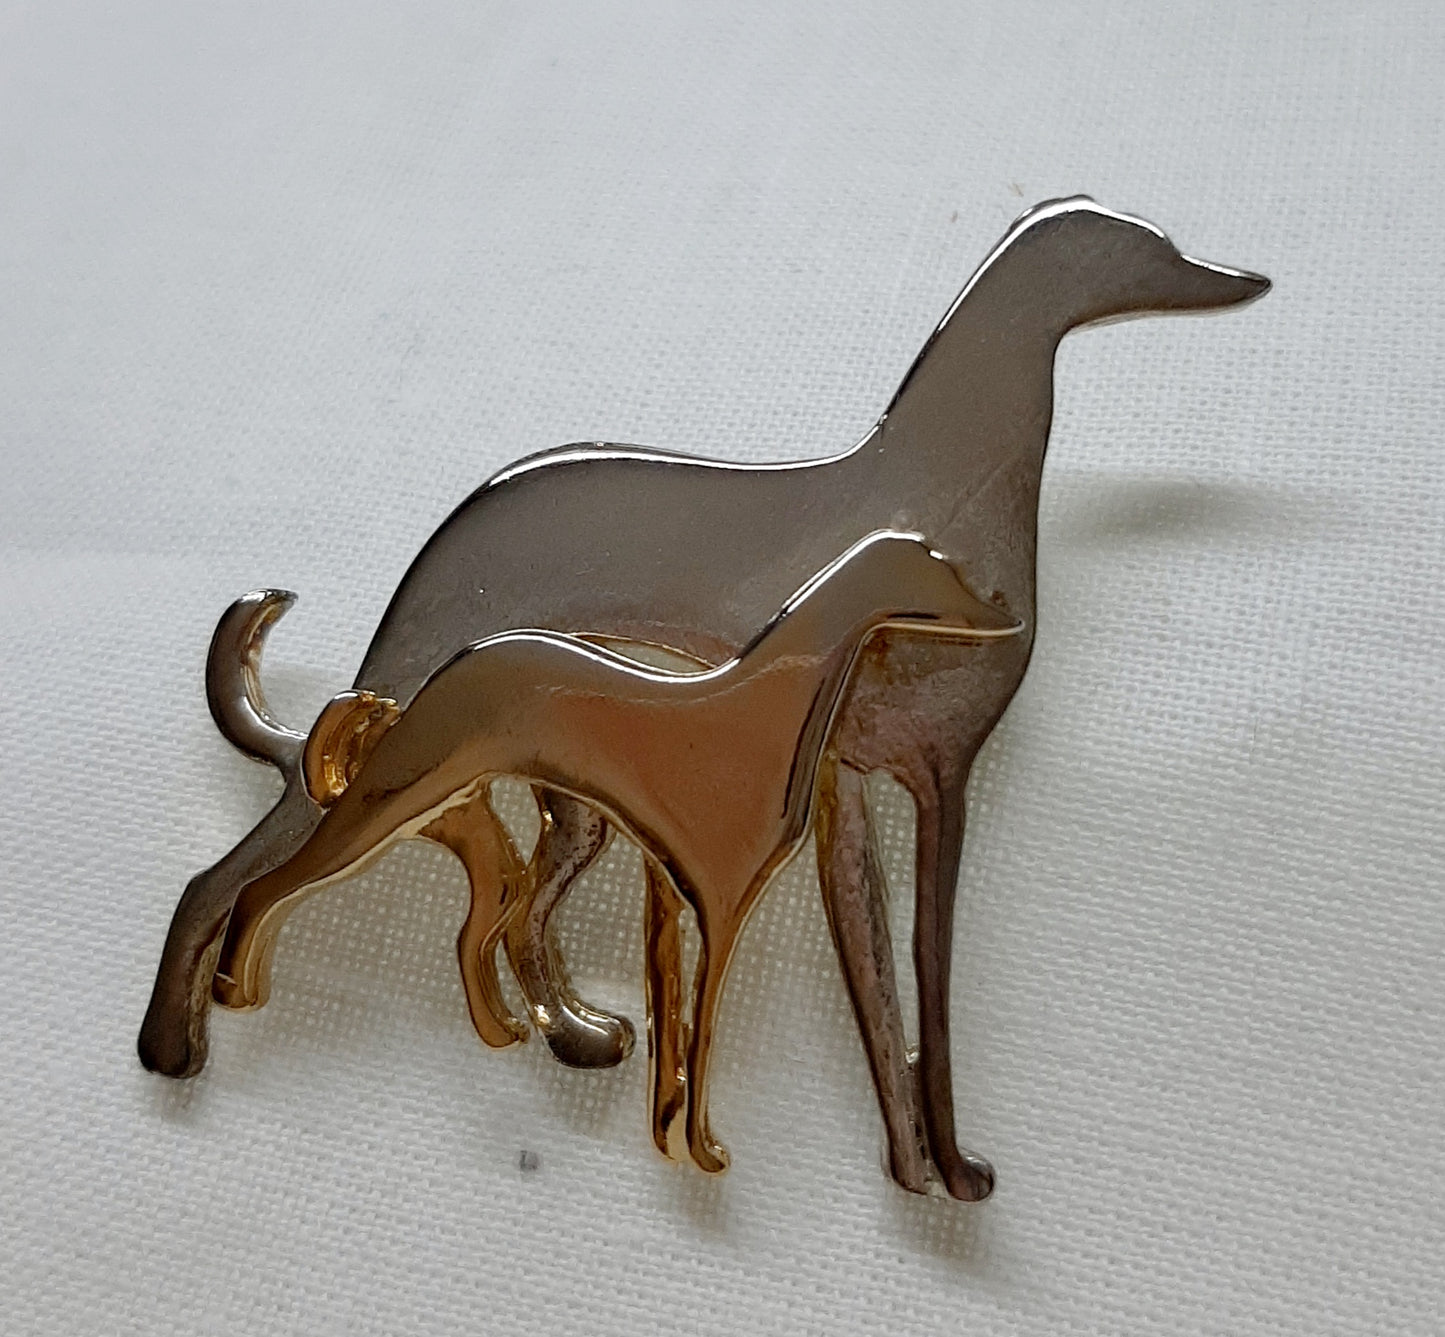 Two standing Hounds broach/pin